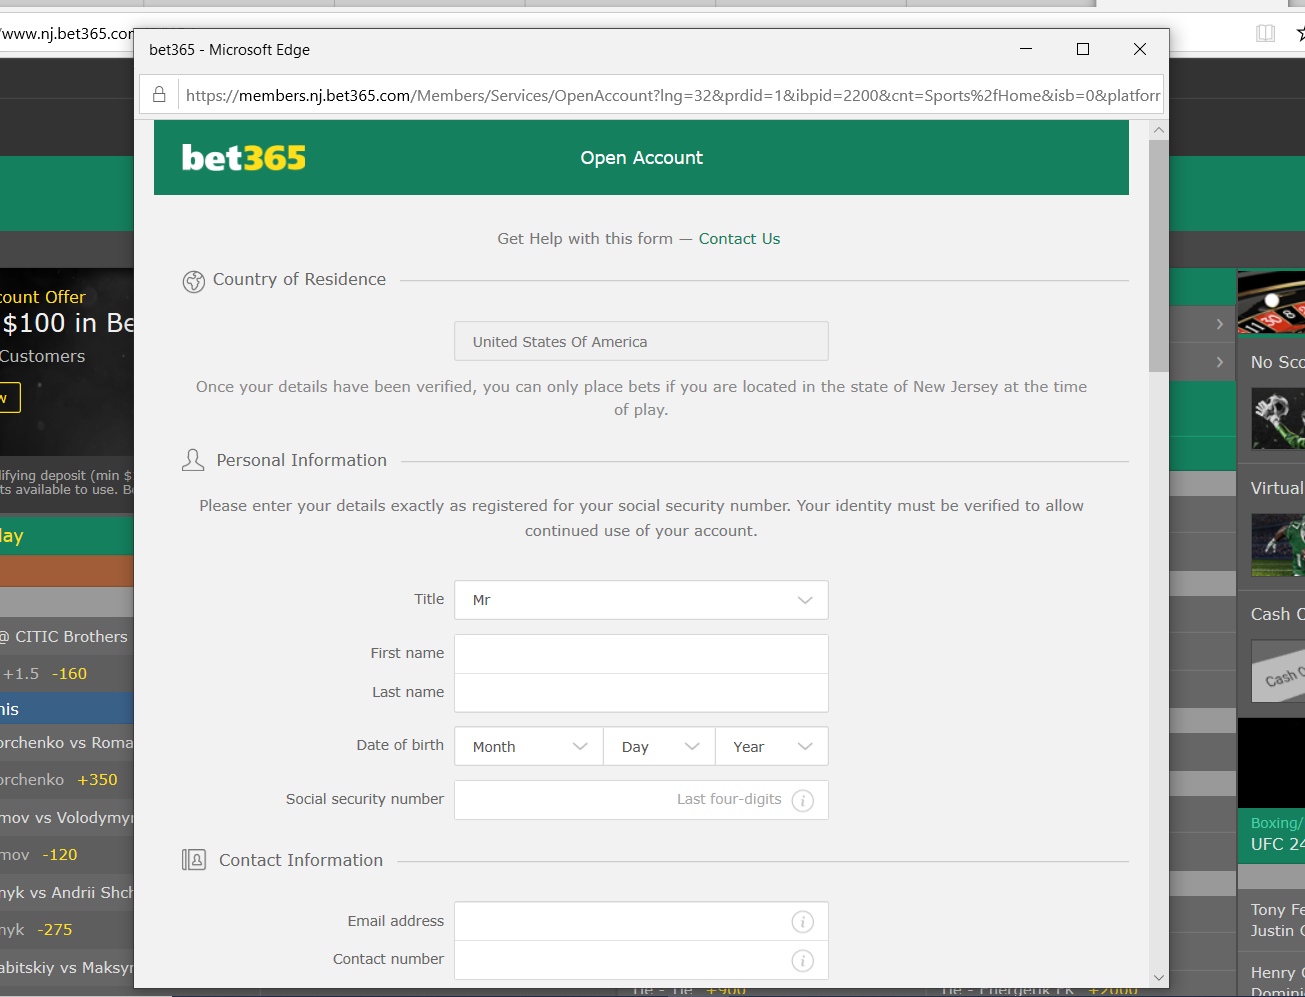 How to live chat on bet365